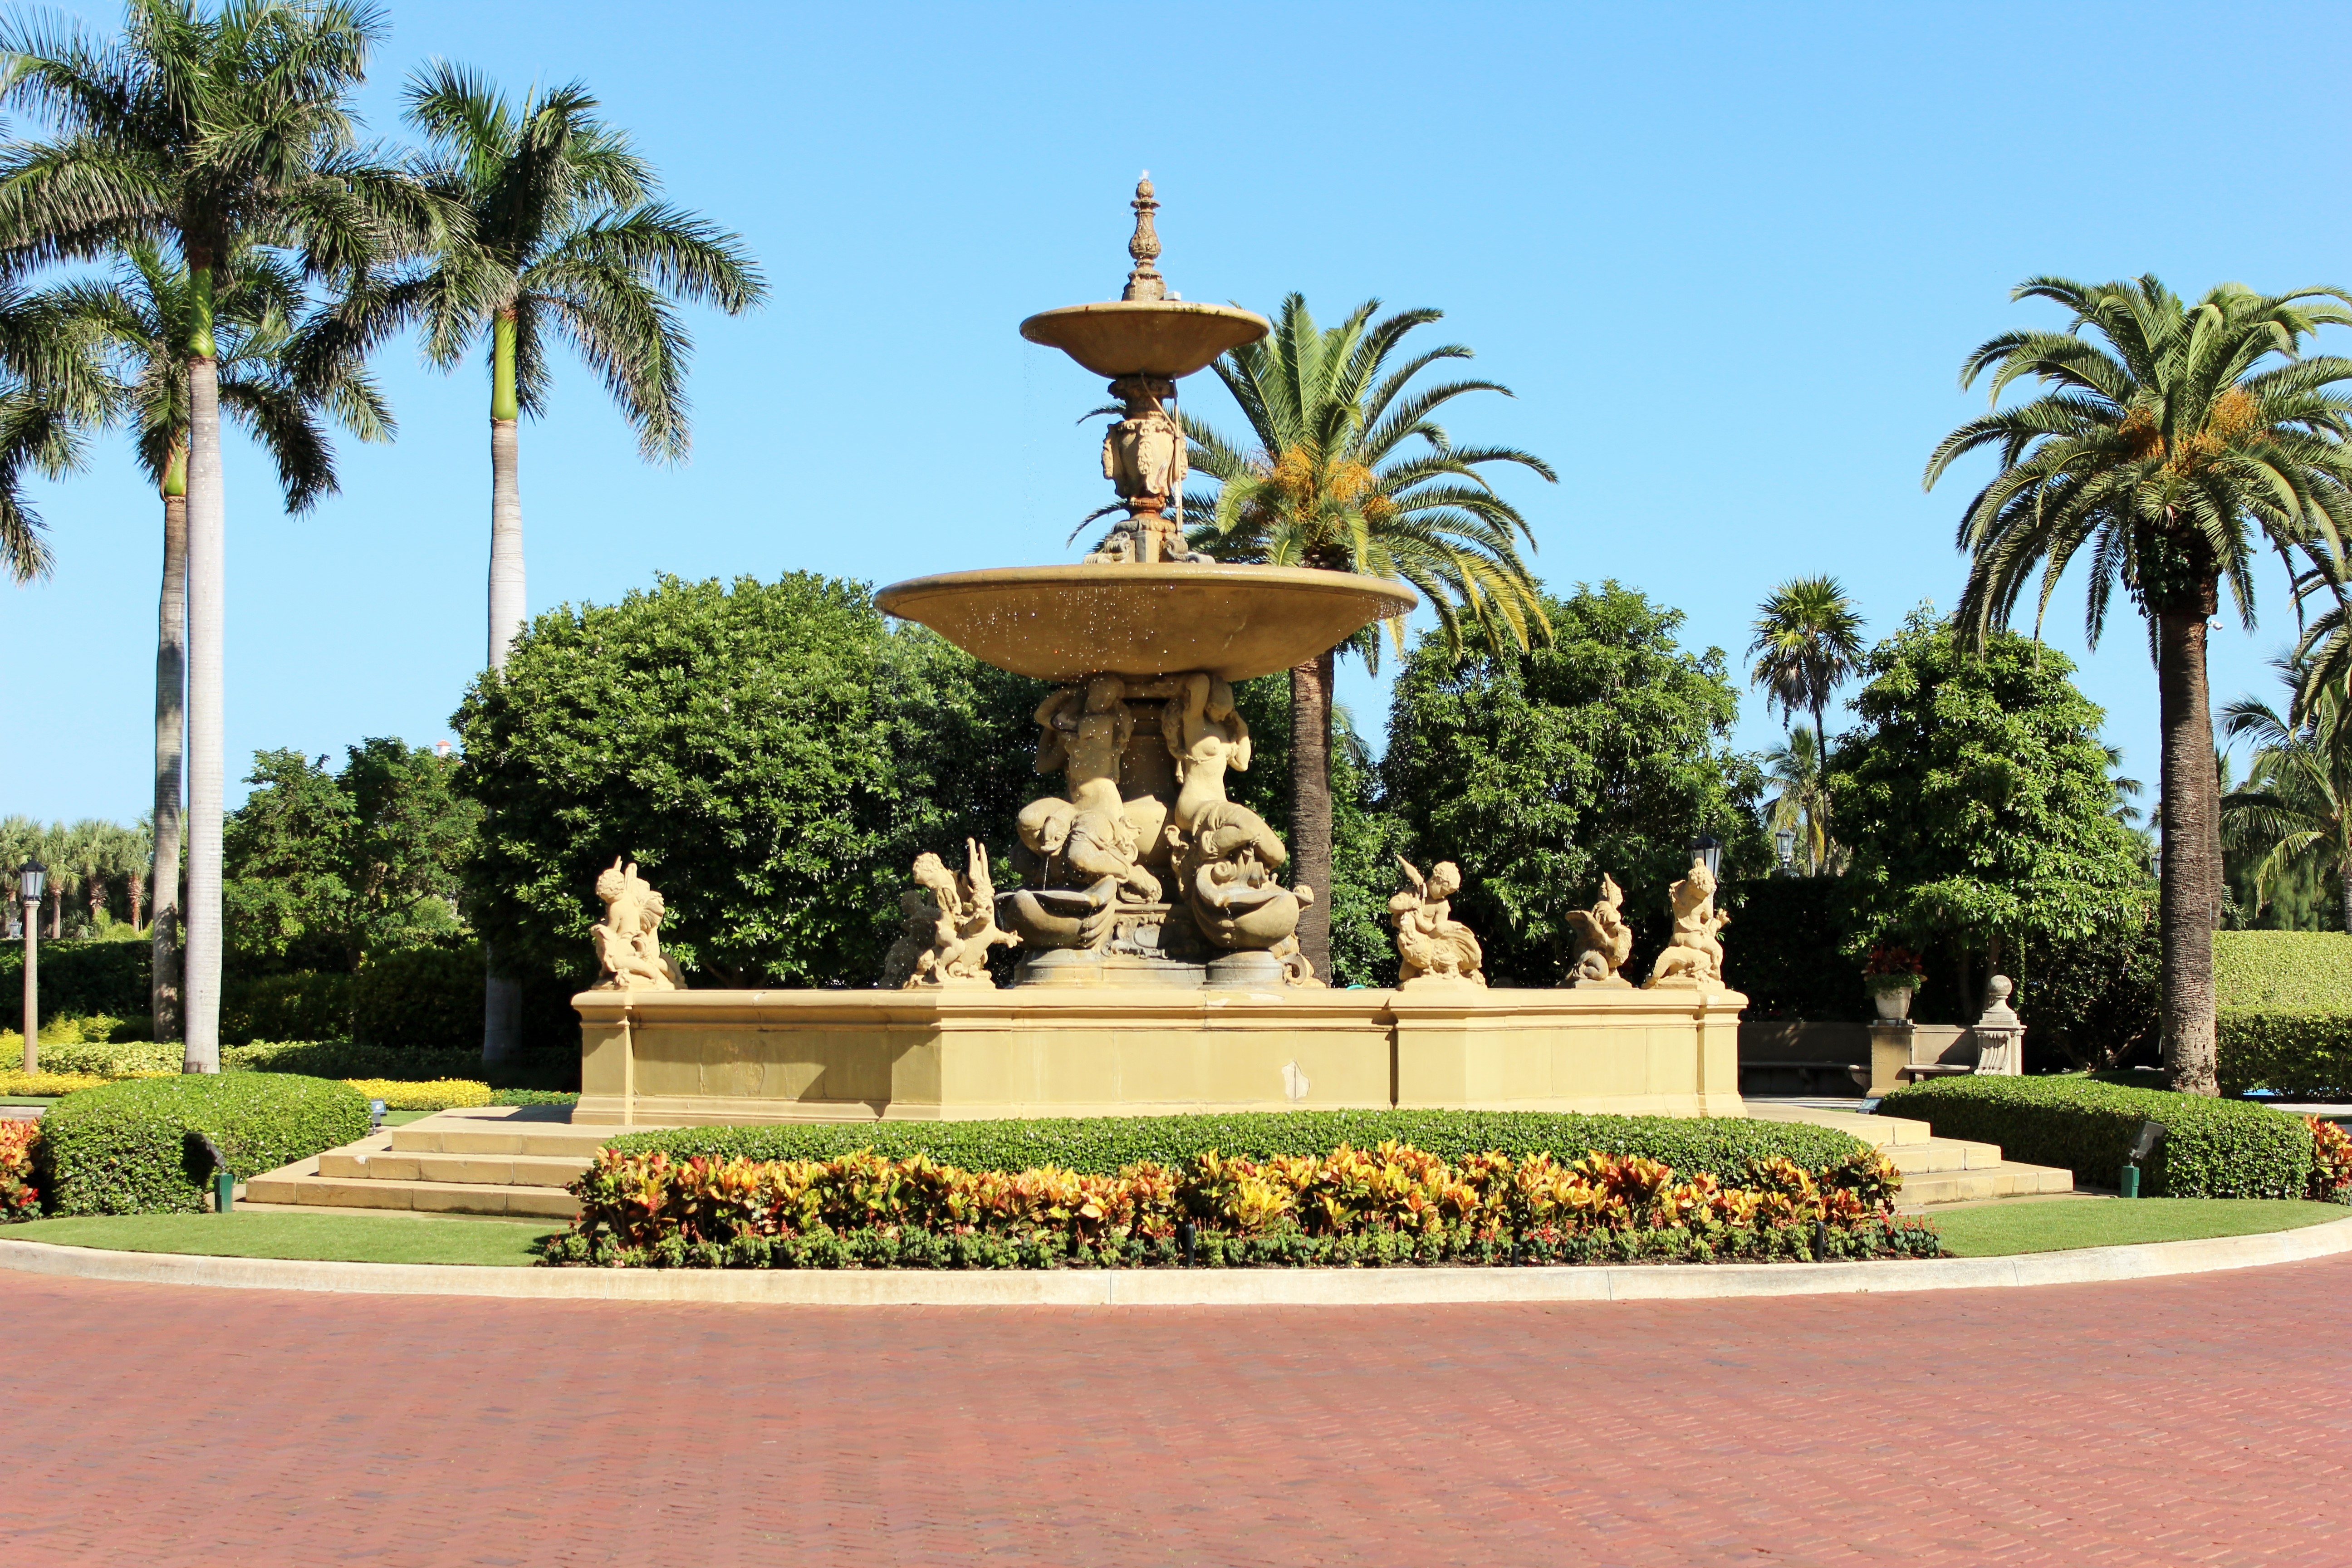 fountain, palm trees, flowers